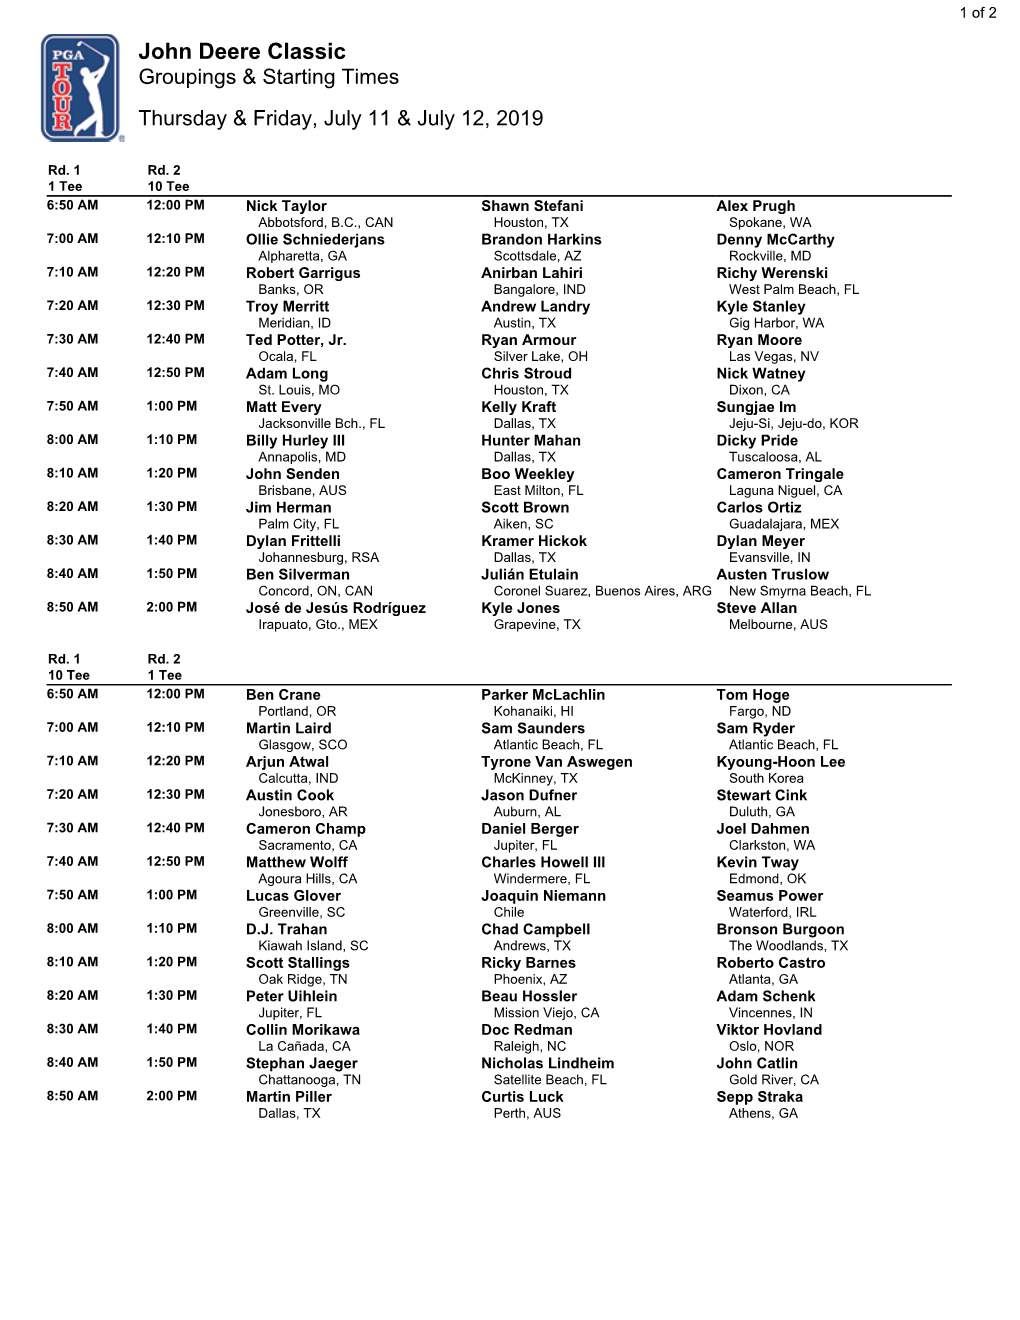 John Deere Classic Groupings & Starting Times Thursday & Friday, July 11 & July 12, 2019